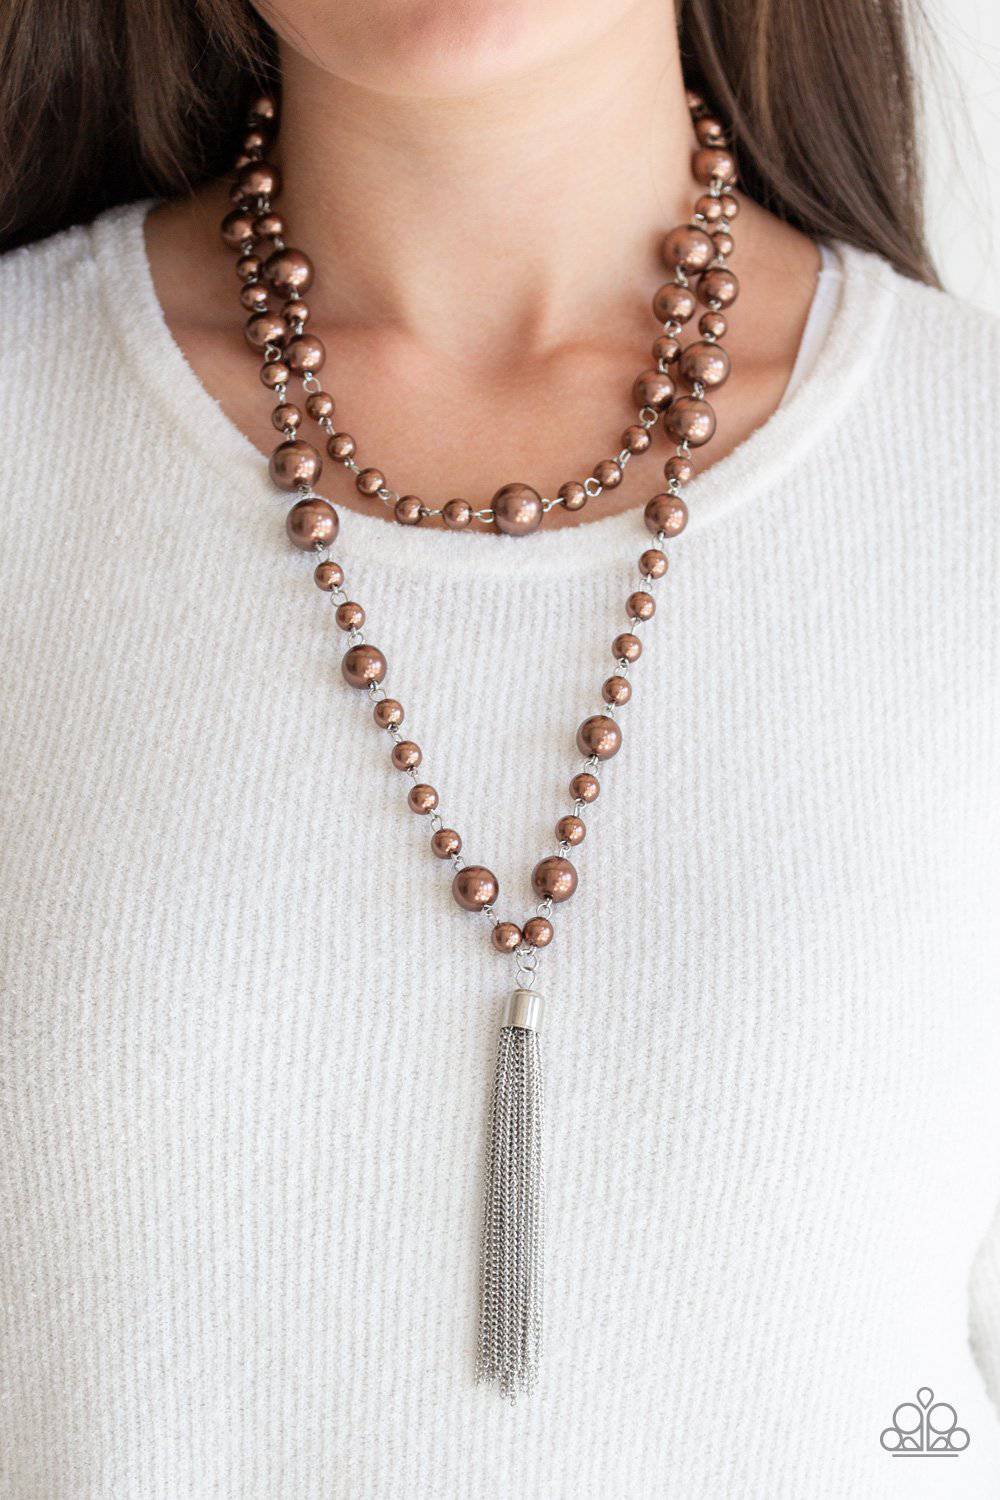 Social Hour Brown Necklace - Paparazzi Accessories - GlaMarous Titi Jewels